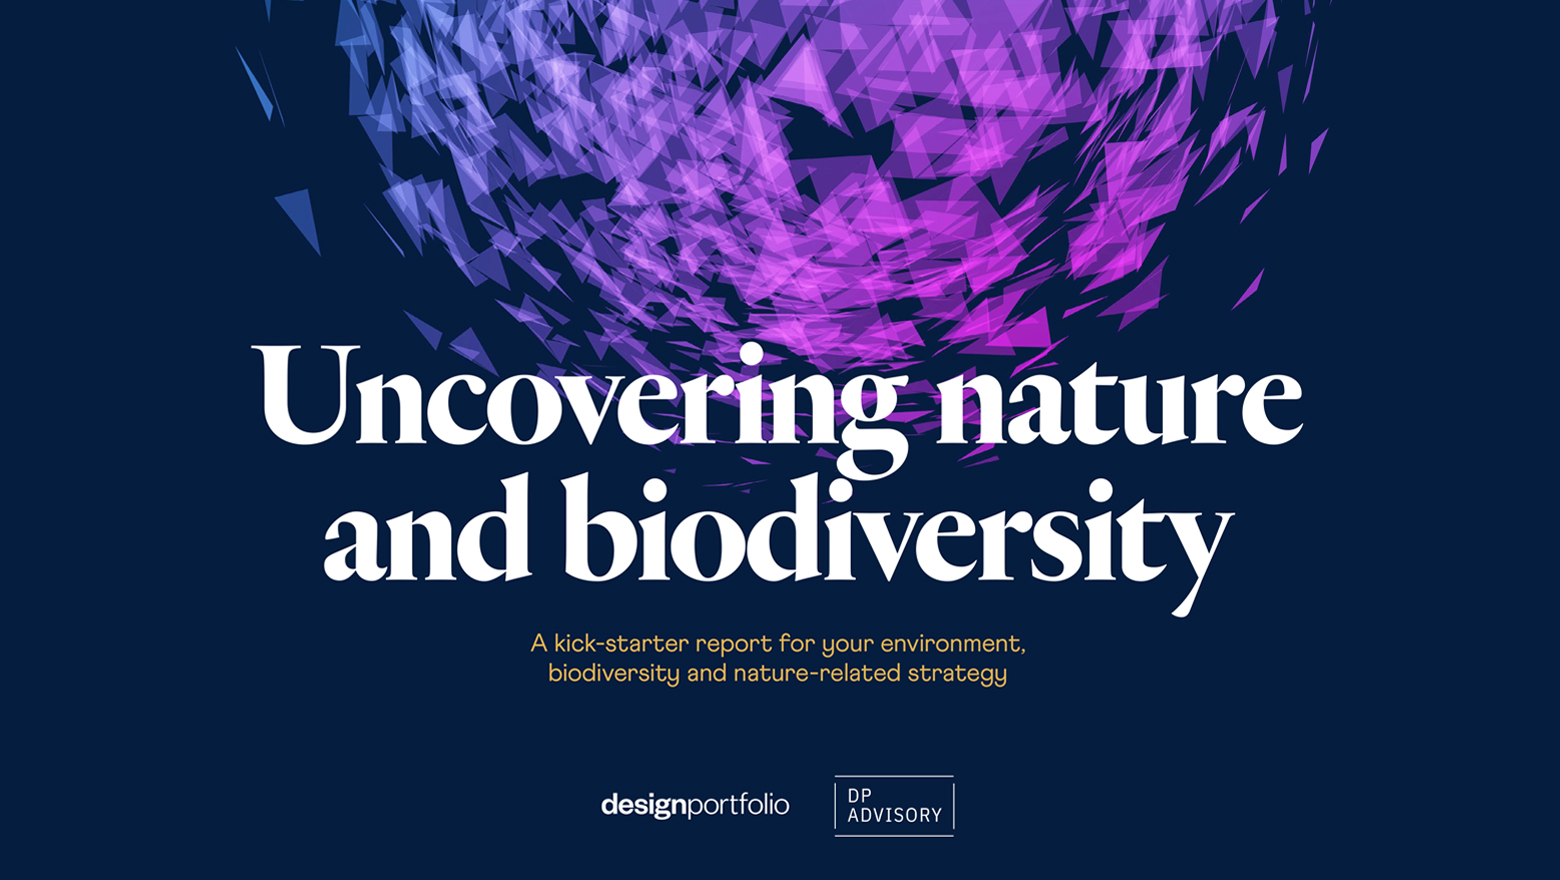 Introducing our latest research report: Uncovering Nature and Biodiversity